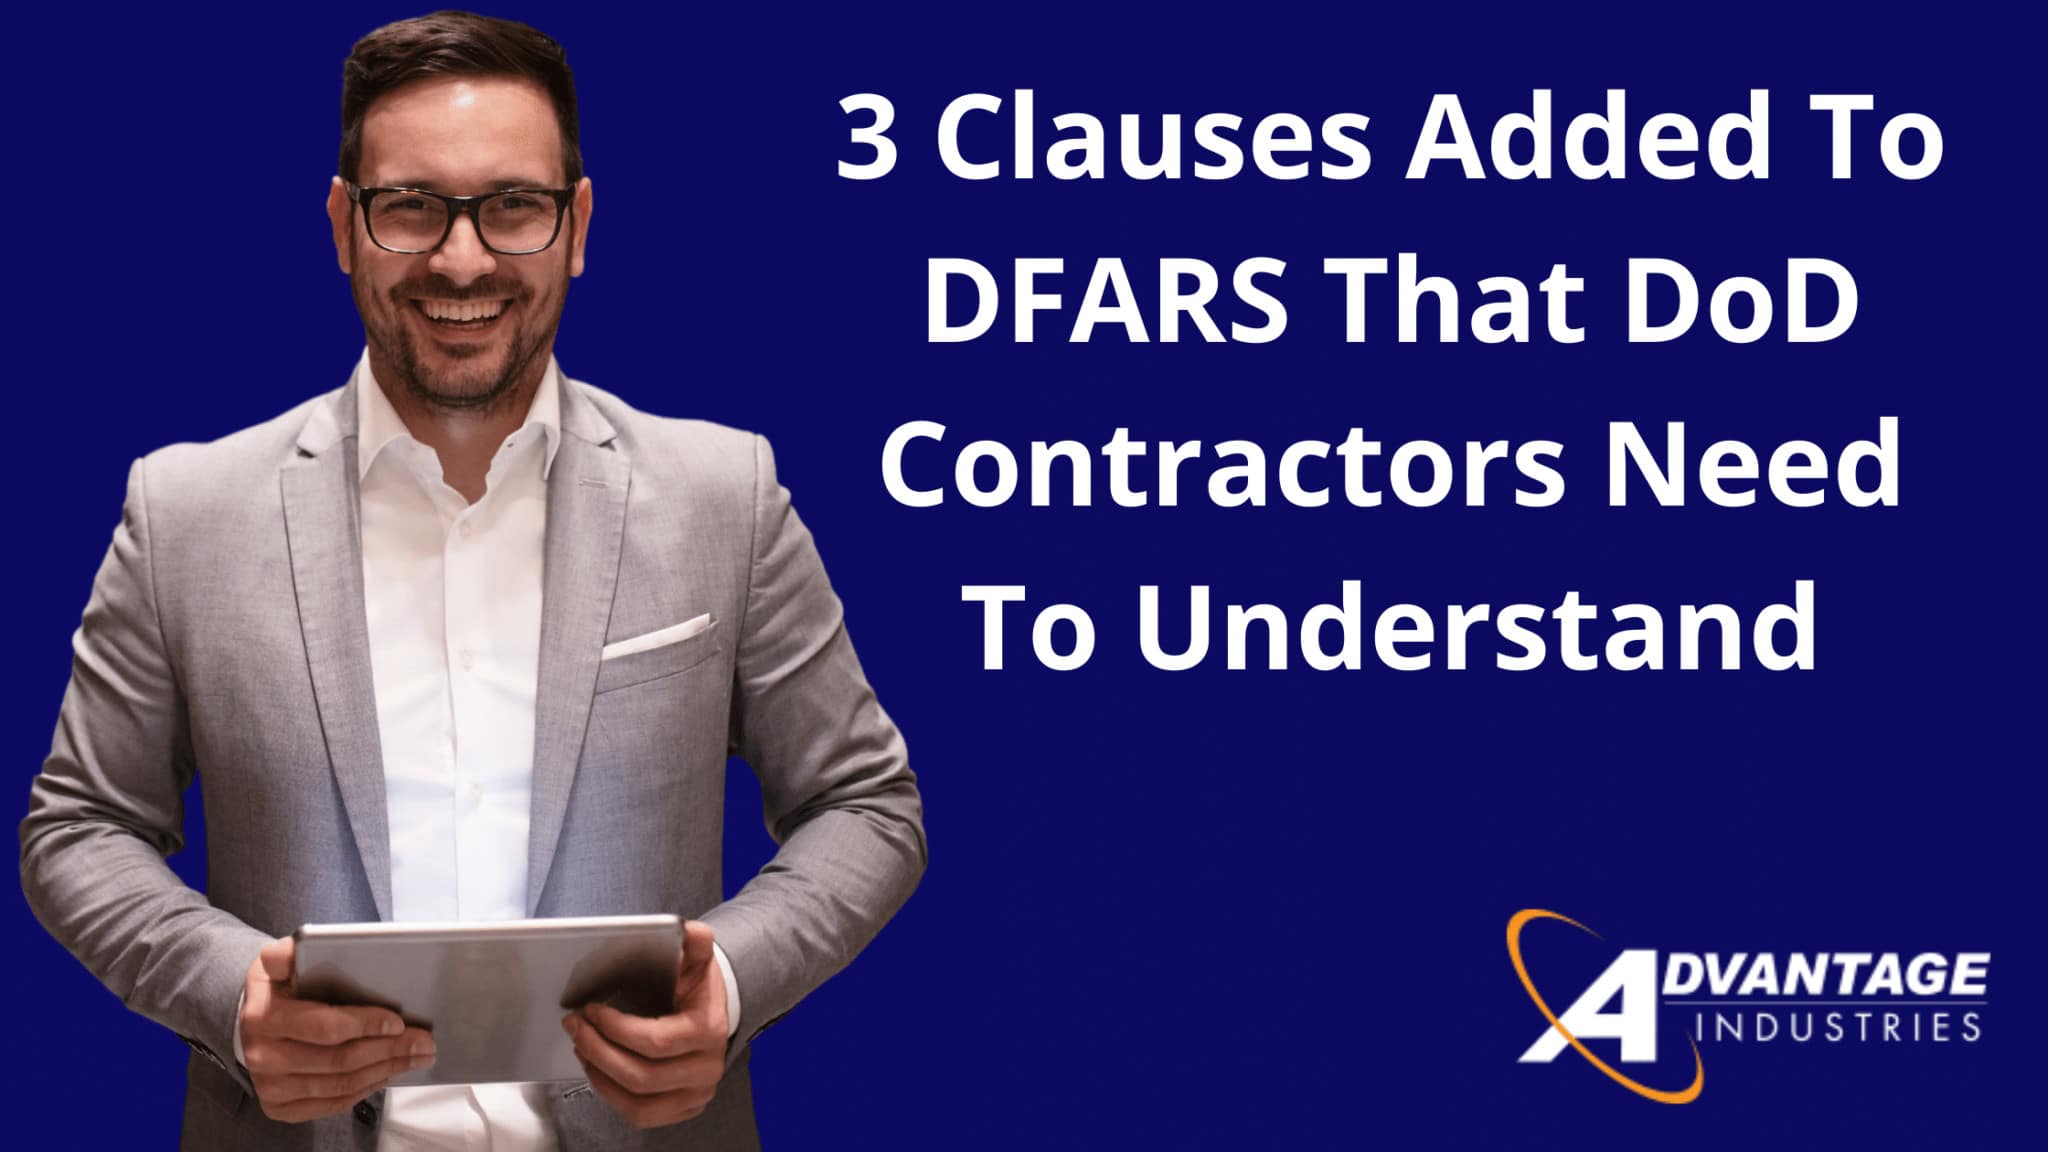 3 Clauses Added To DFARS That DoD Contractors Need To Understand